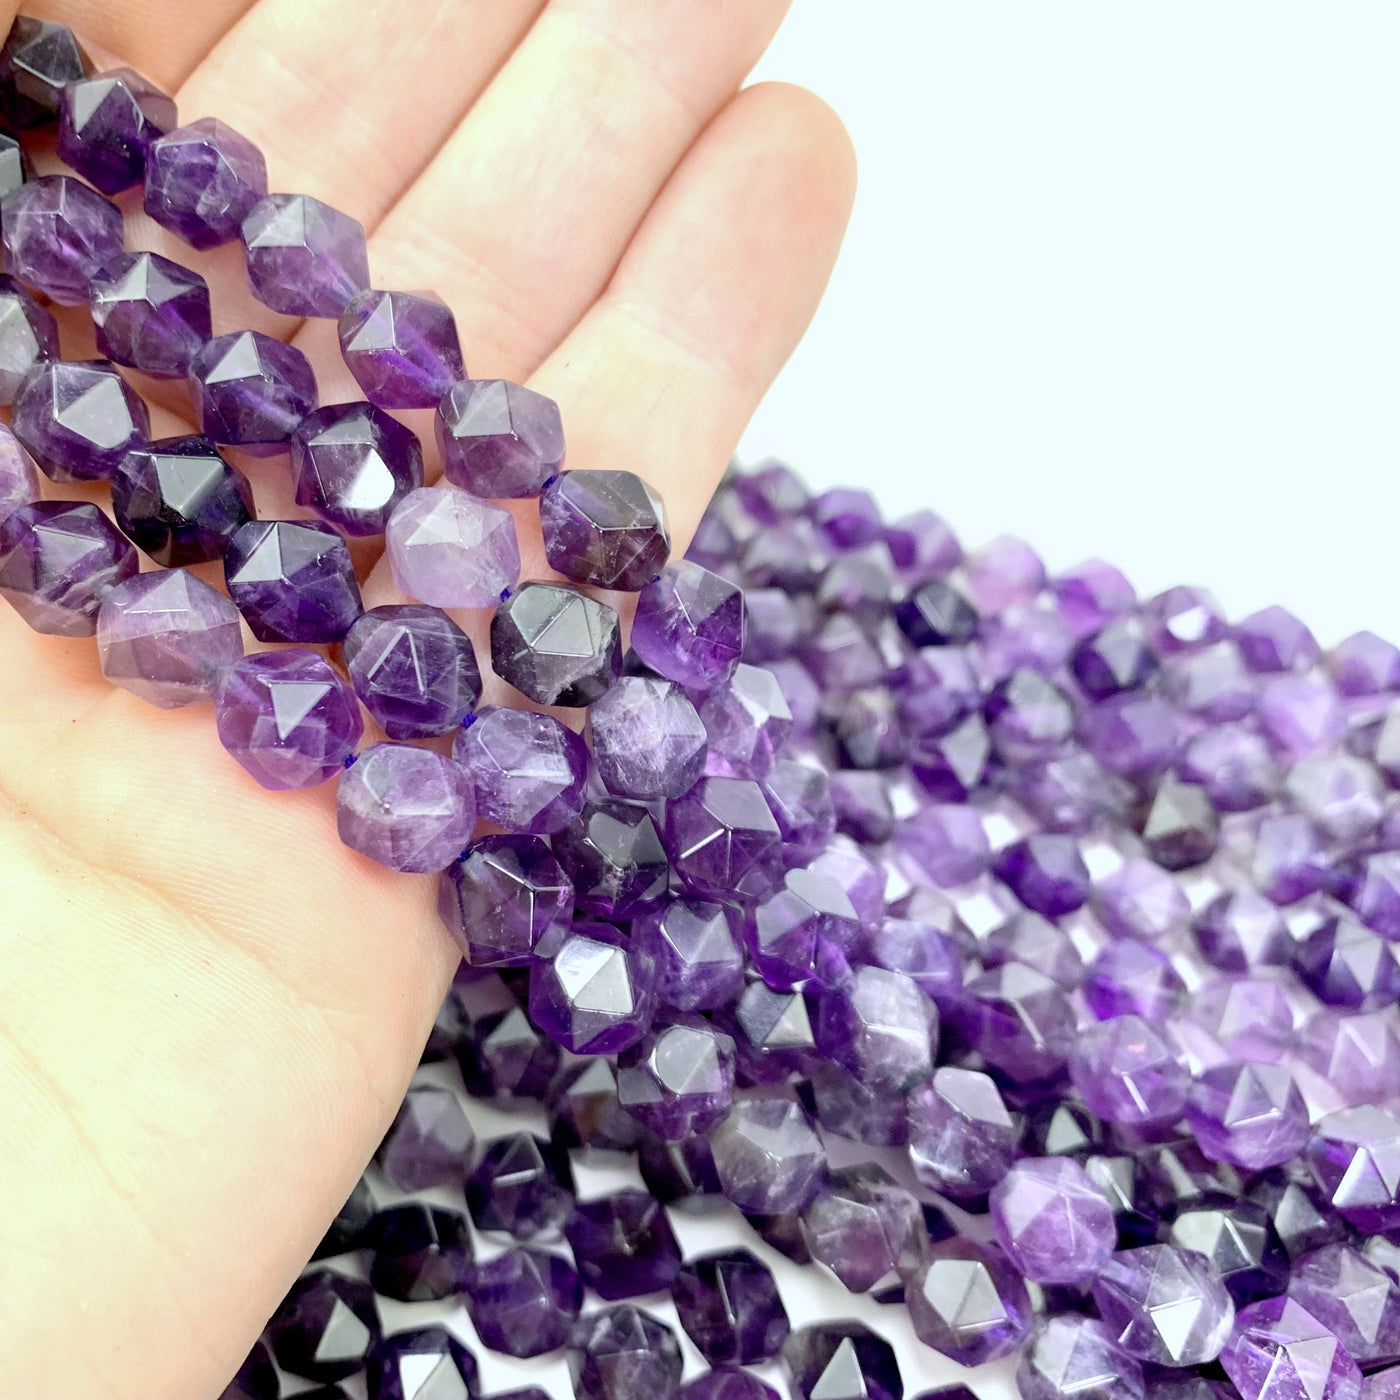 amethyst beads in hand with more amethyst beads in the background with a white backdrop